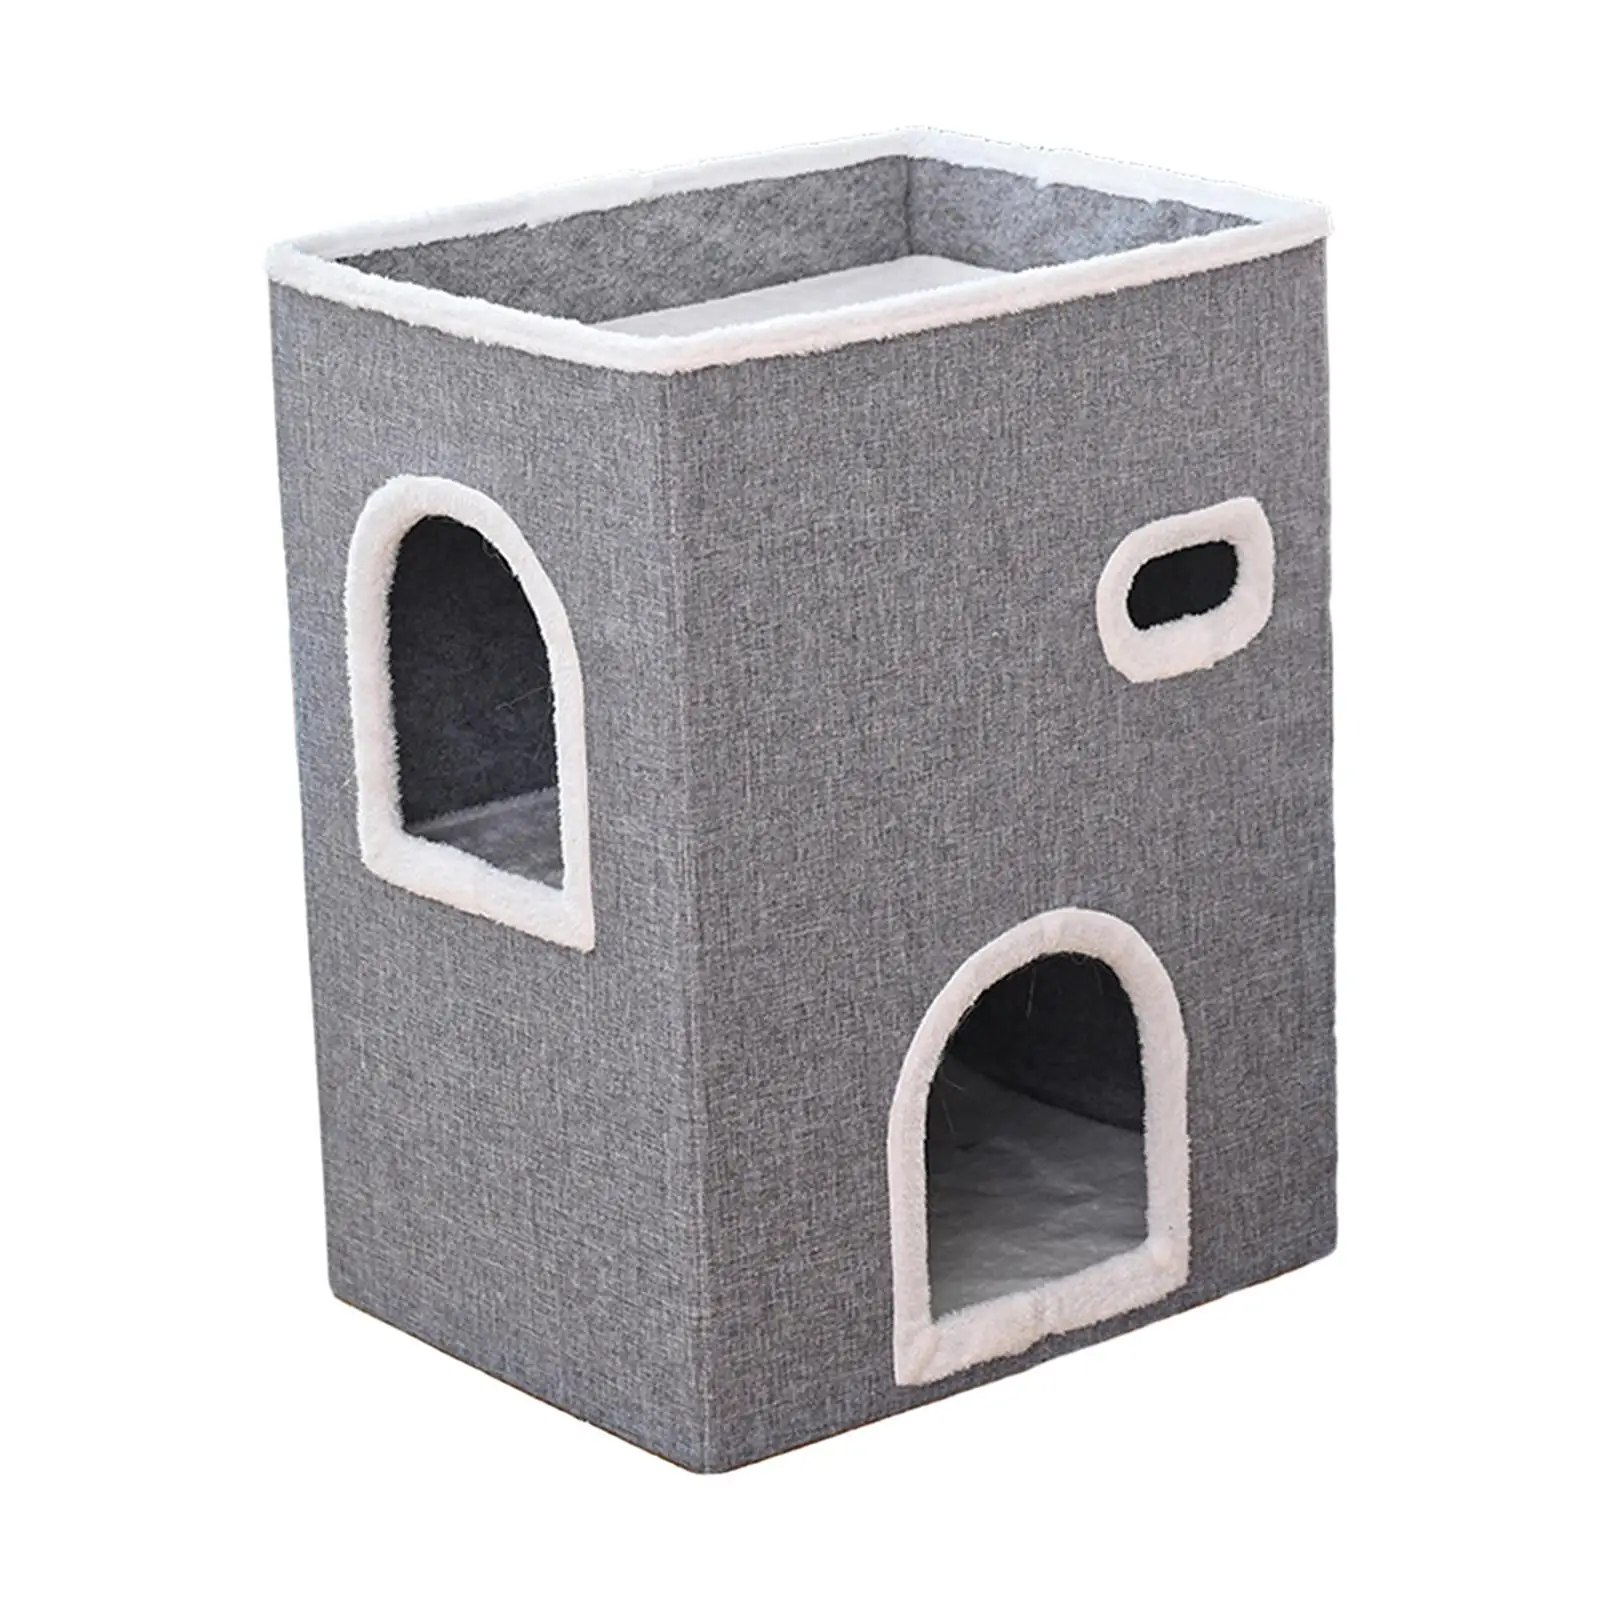 Foldable Cat Bed Condo Nest with Scratch Pad for Pet Supplies Playing Climb